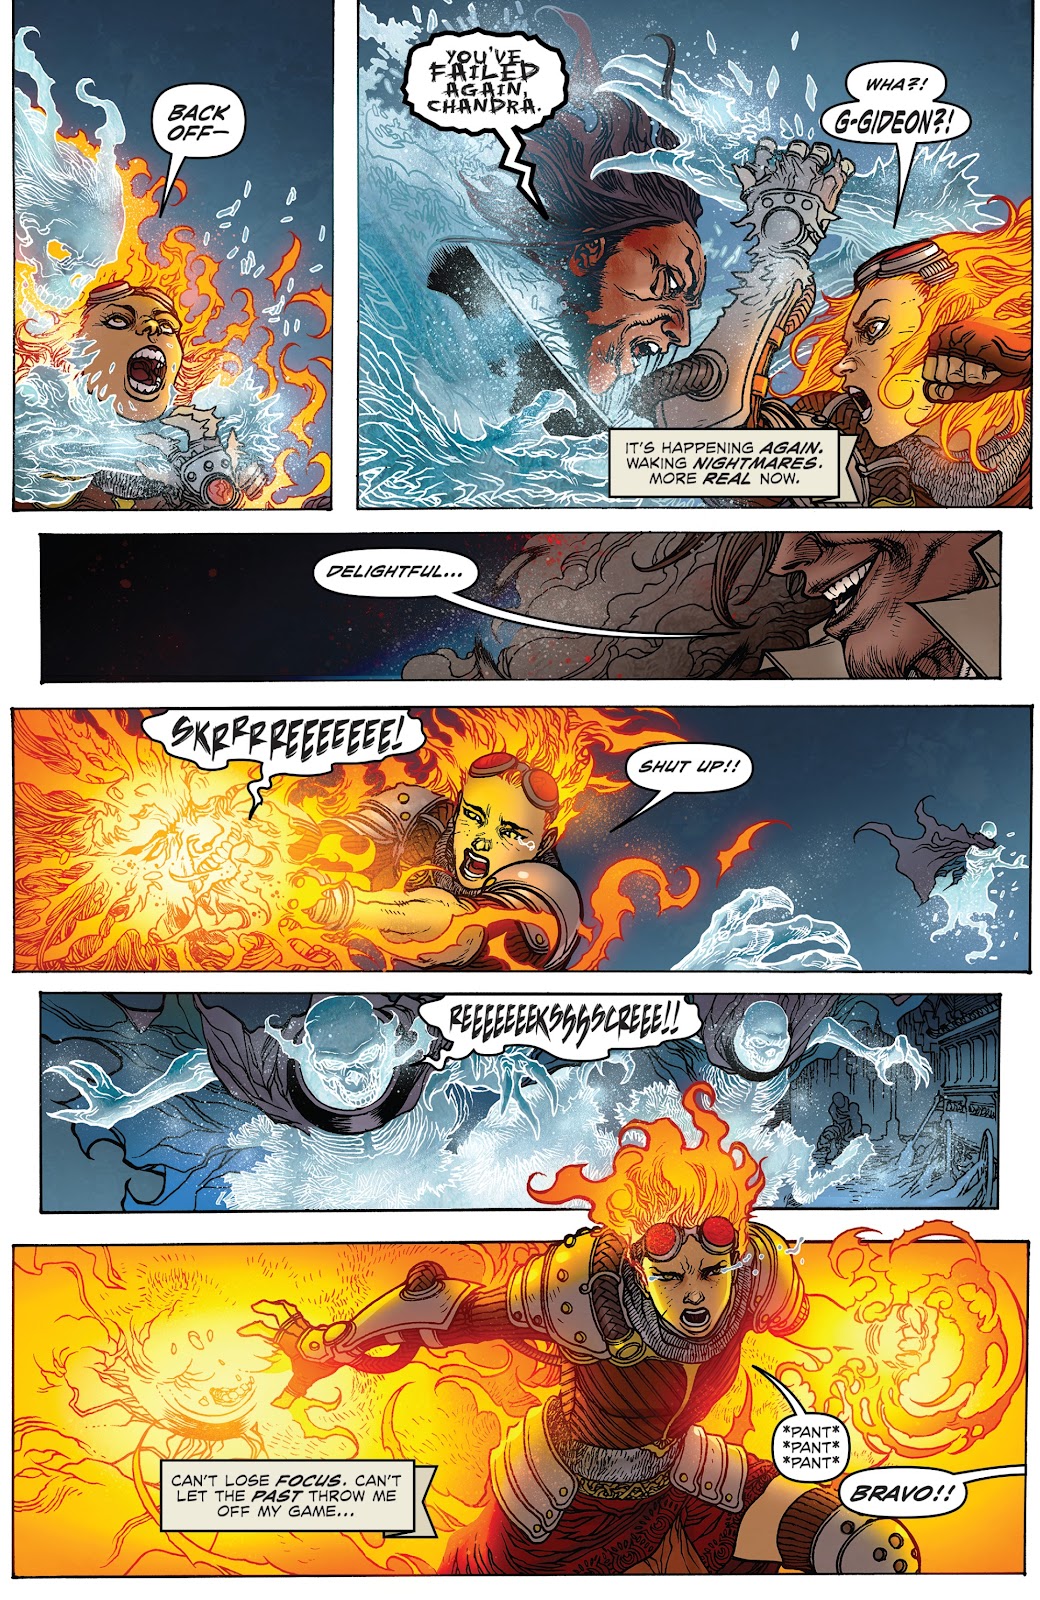 Magic: The Gathering: Chandra issue 2 - Page 15